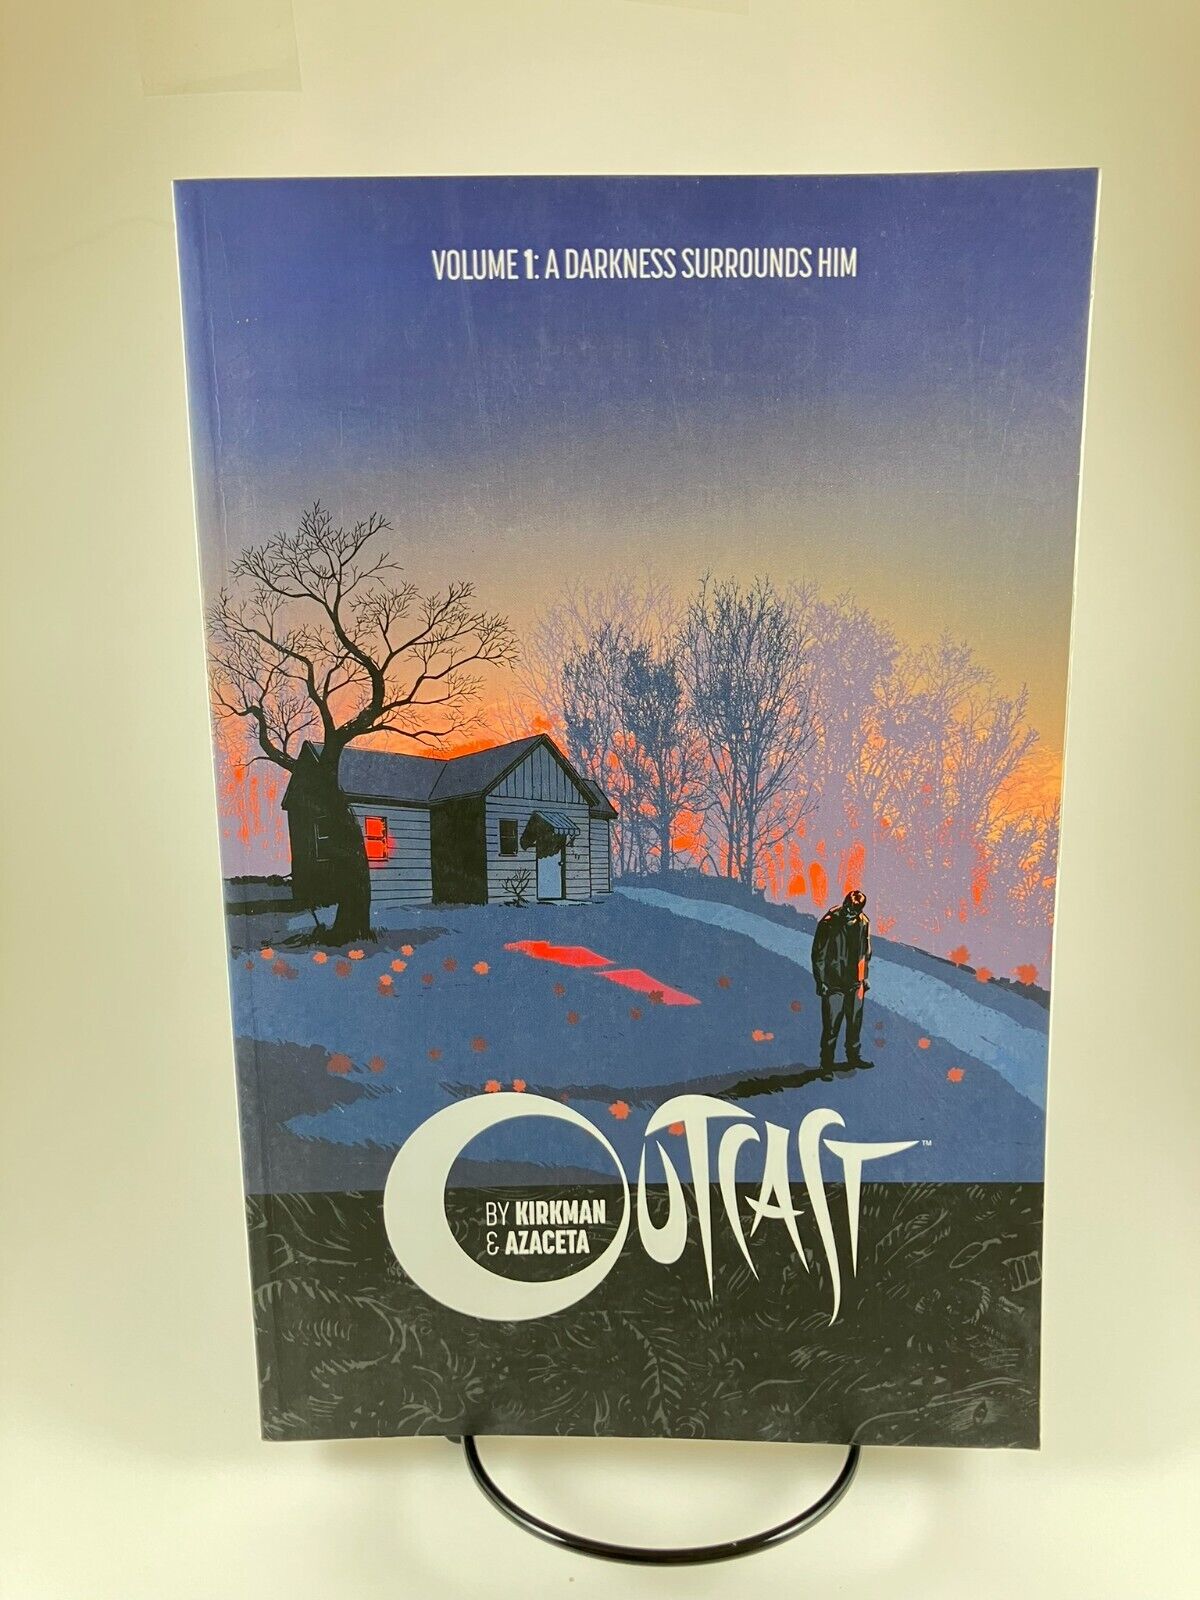 Outcast by Kirkman & Azaceta Vol. 1: A Darkness Surrounds Him - Great Condition